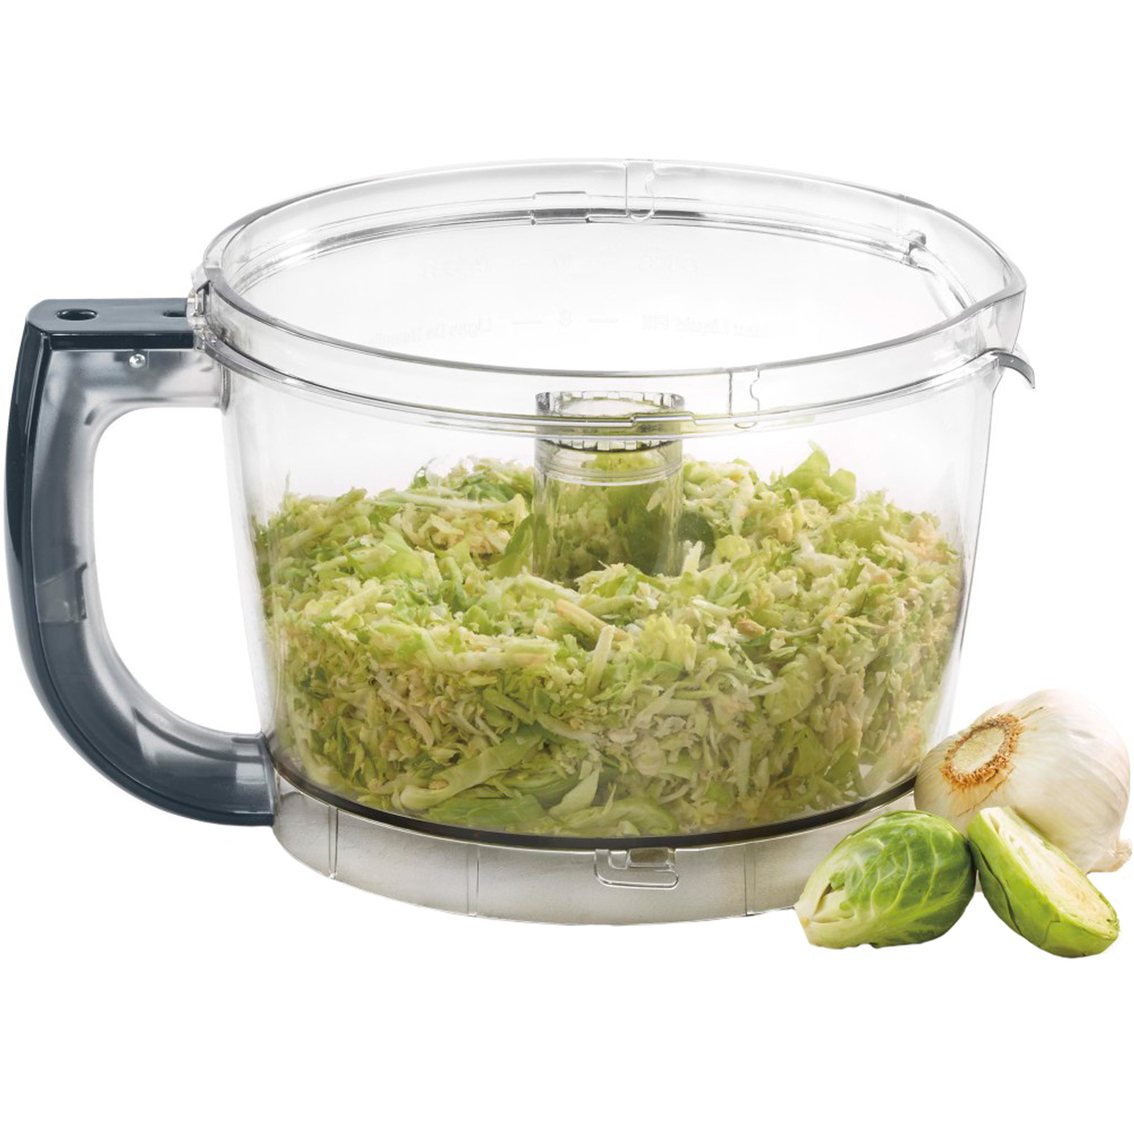 Elite Collection 2.0 12-Cup Food Processor in Die Cast - Image 8 of 9